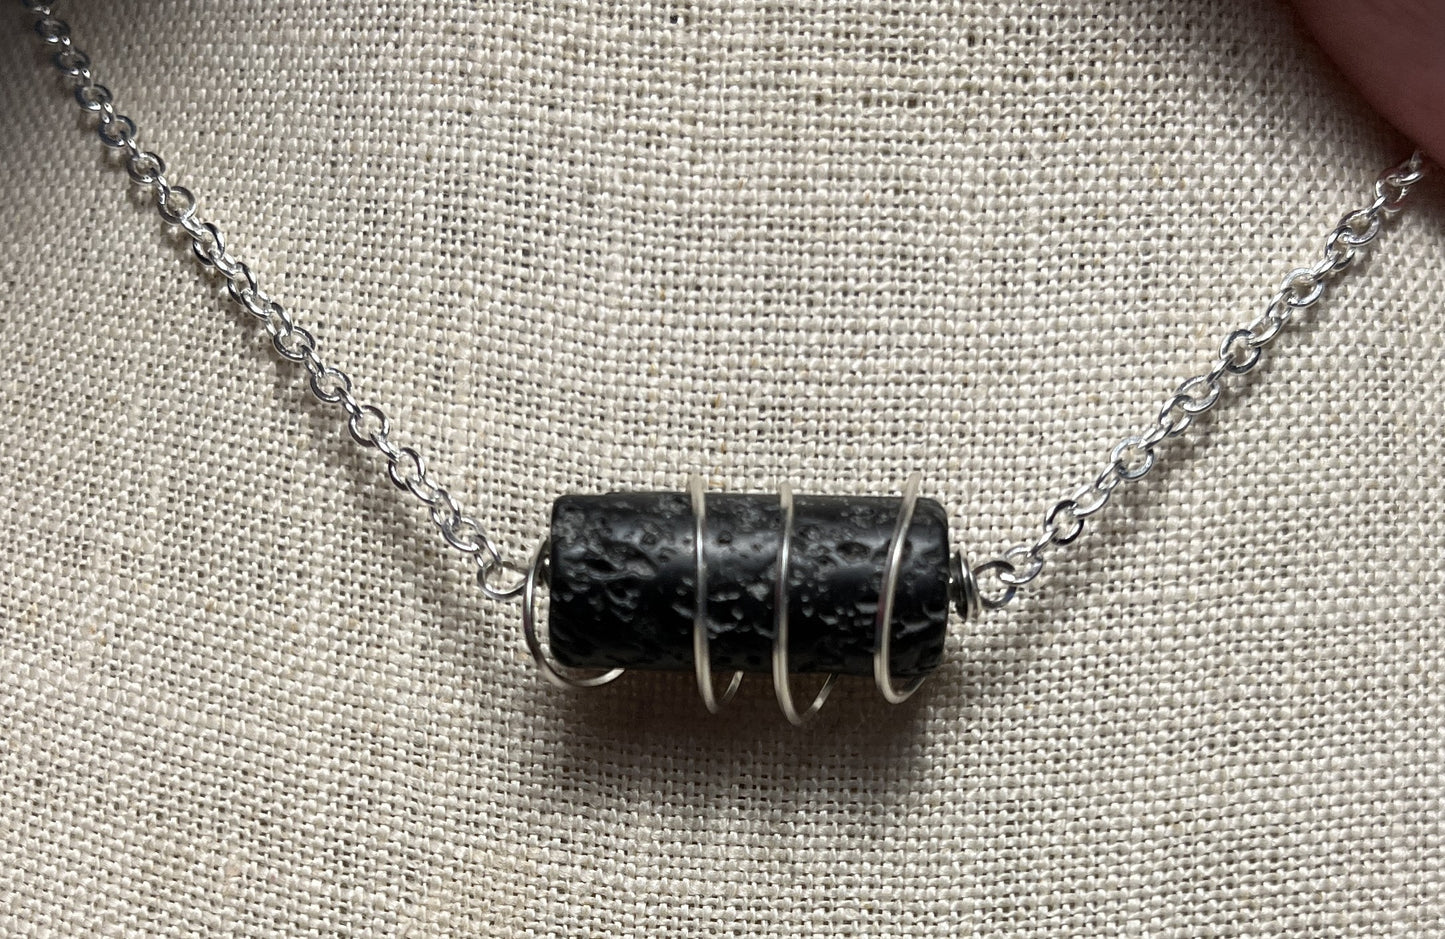 Twisted Lava Aromatherapy Necklace